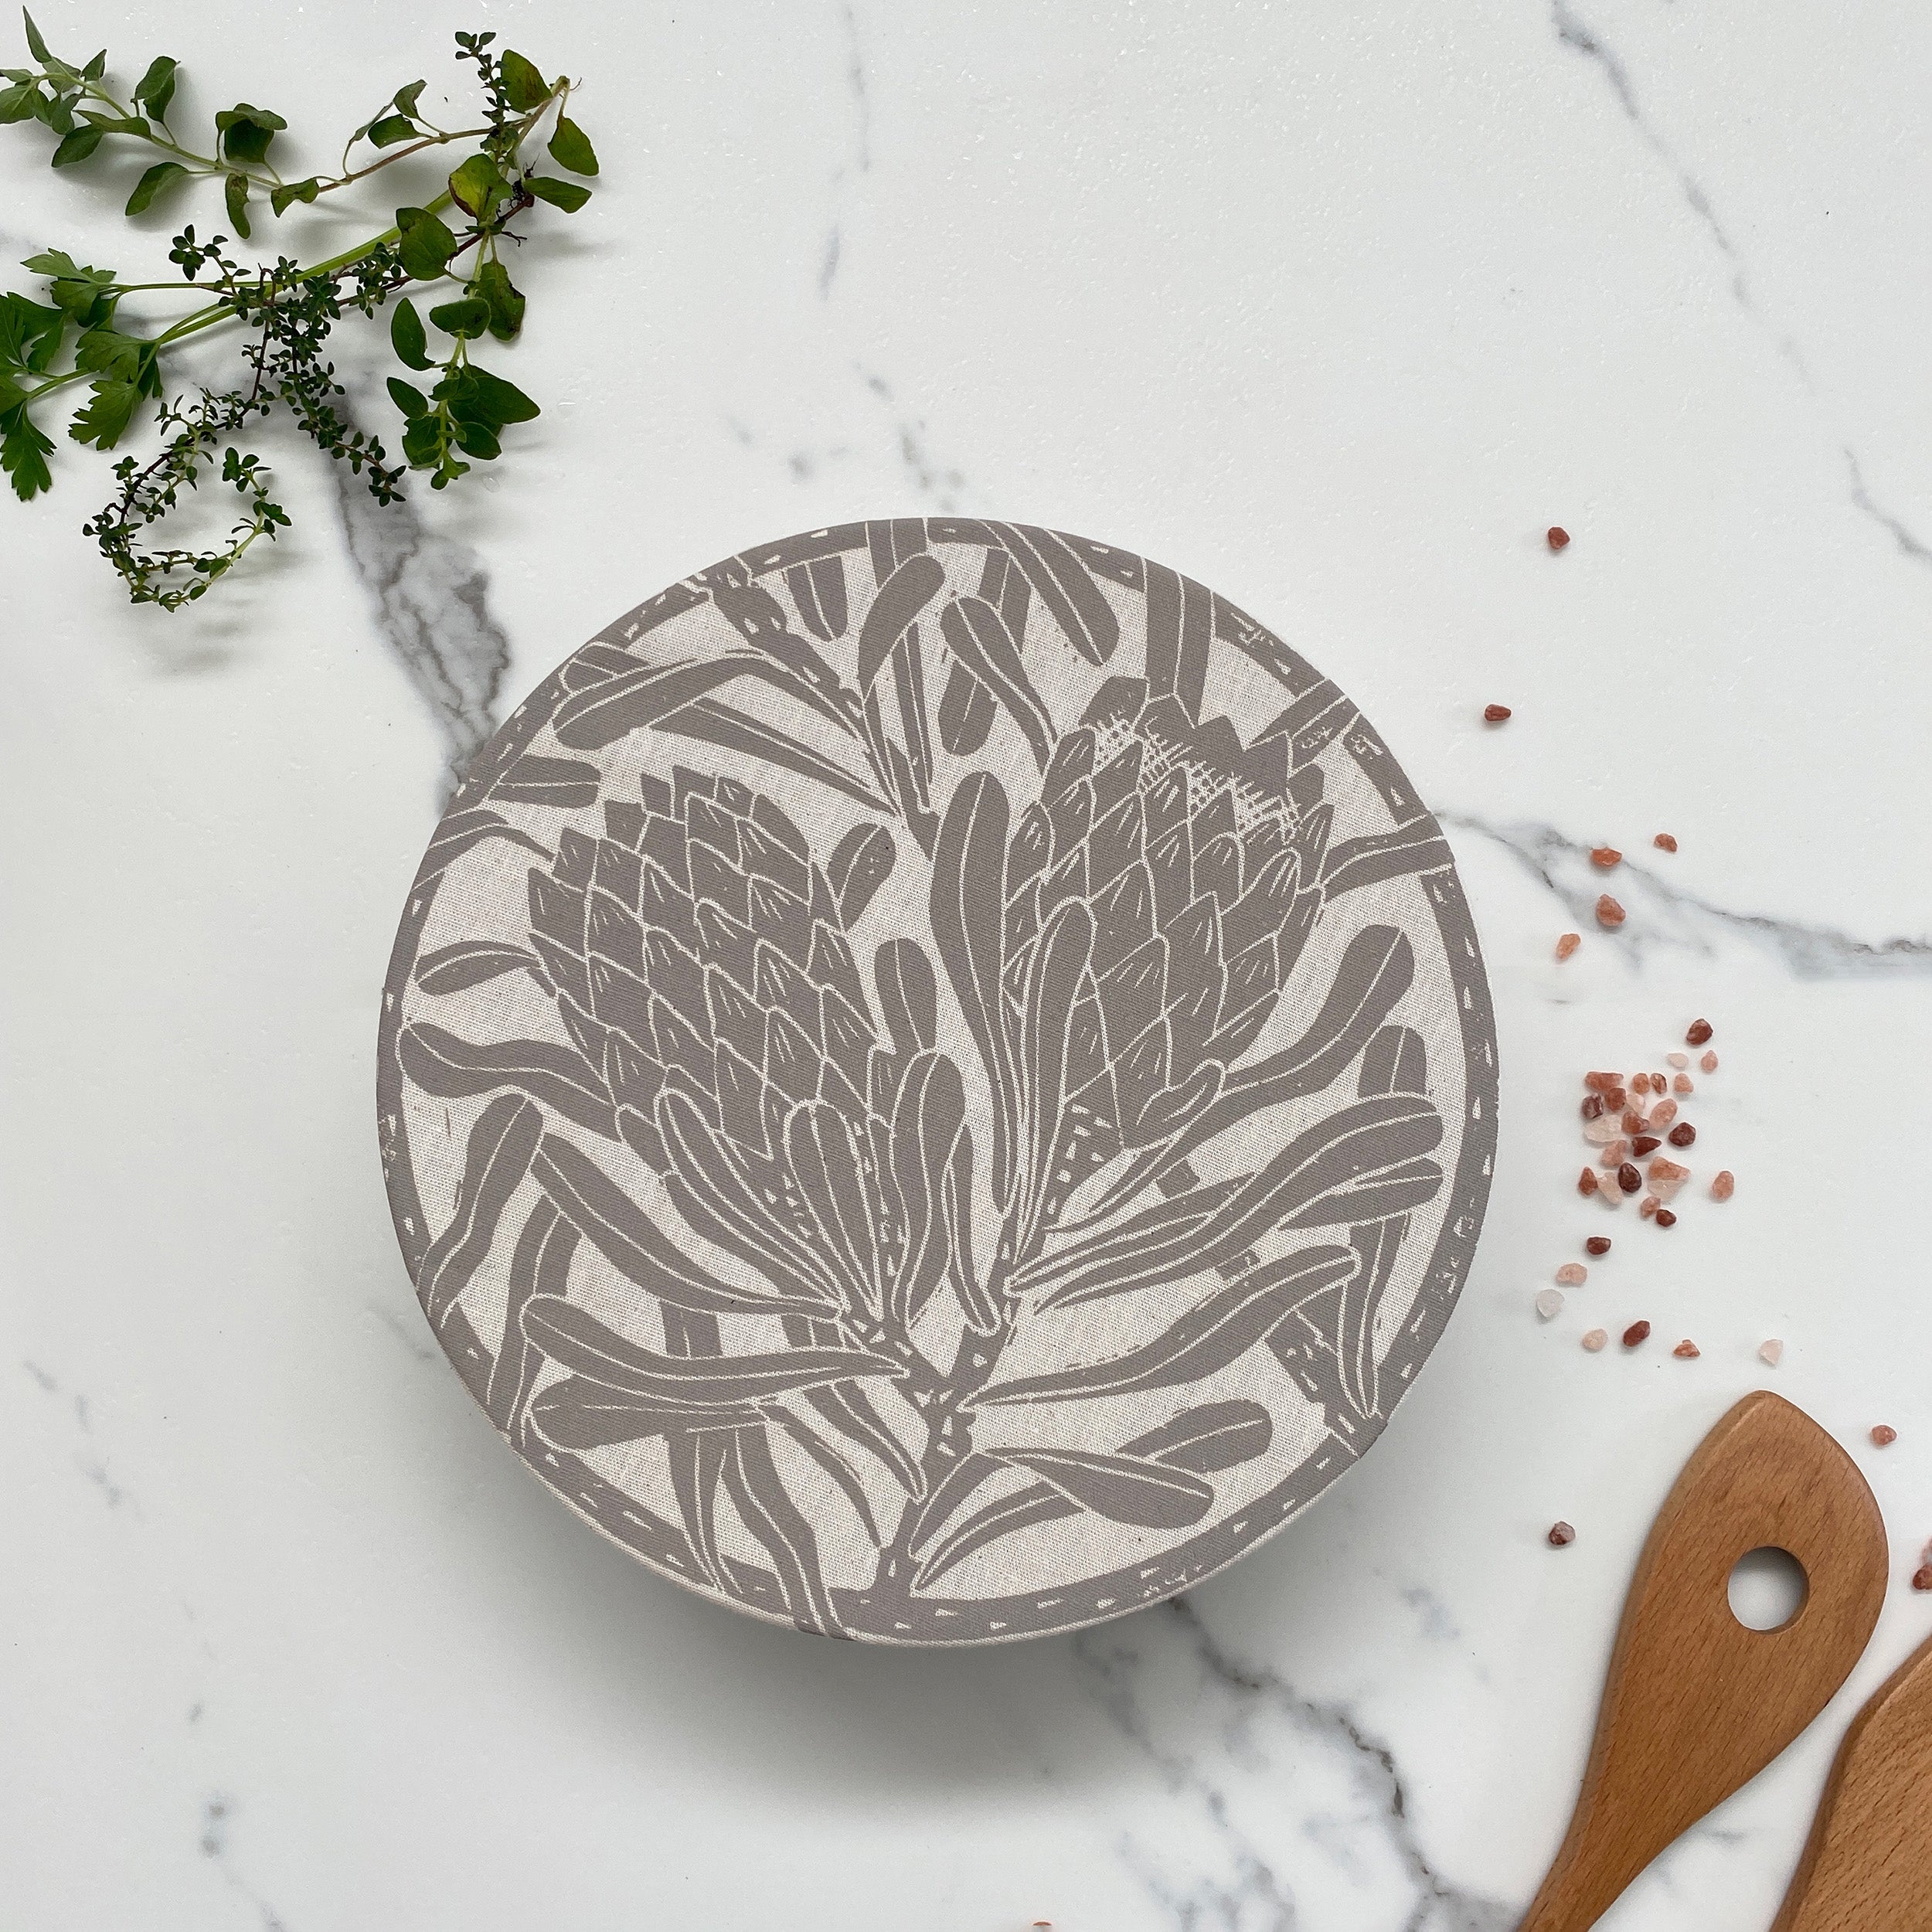 Dish and Bowl Cover Medium Protea Print | single bowl cover for medium salads and leftovers